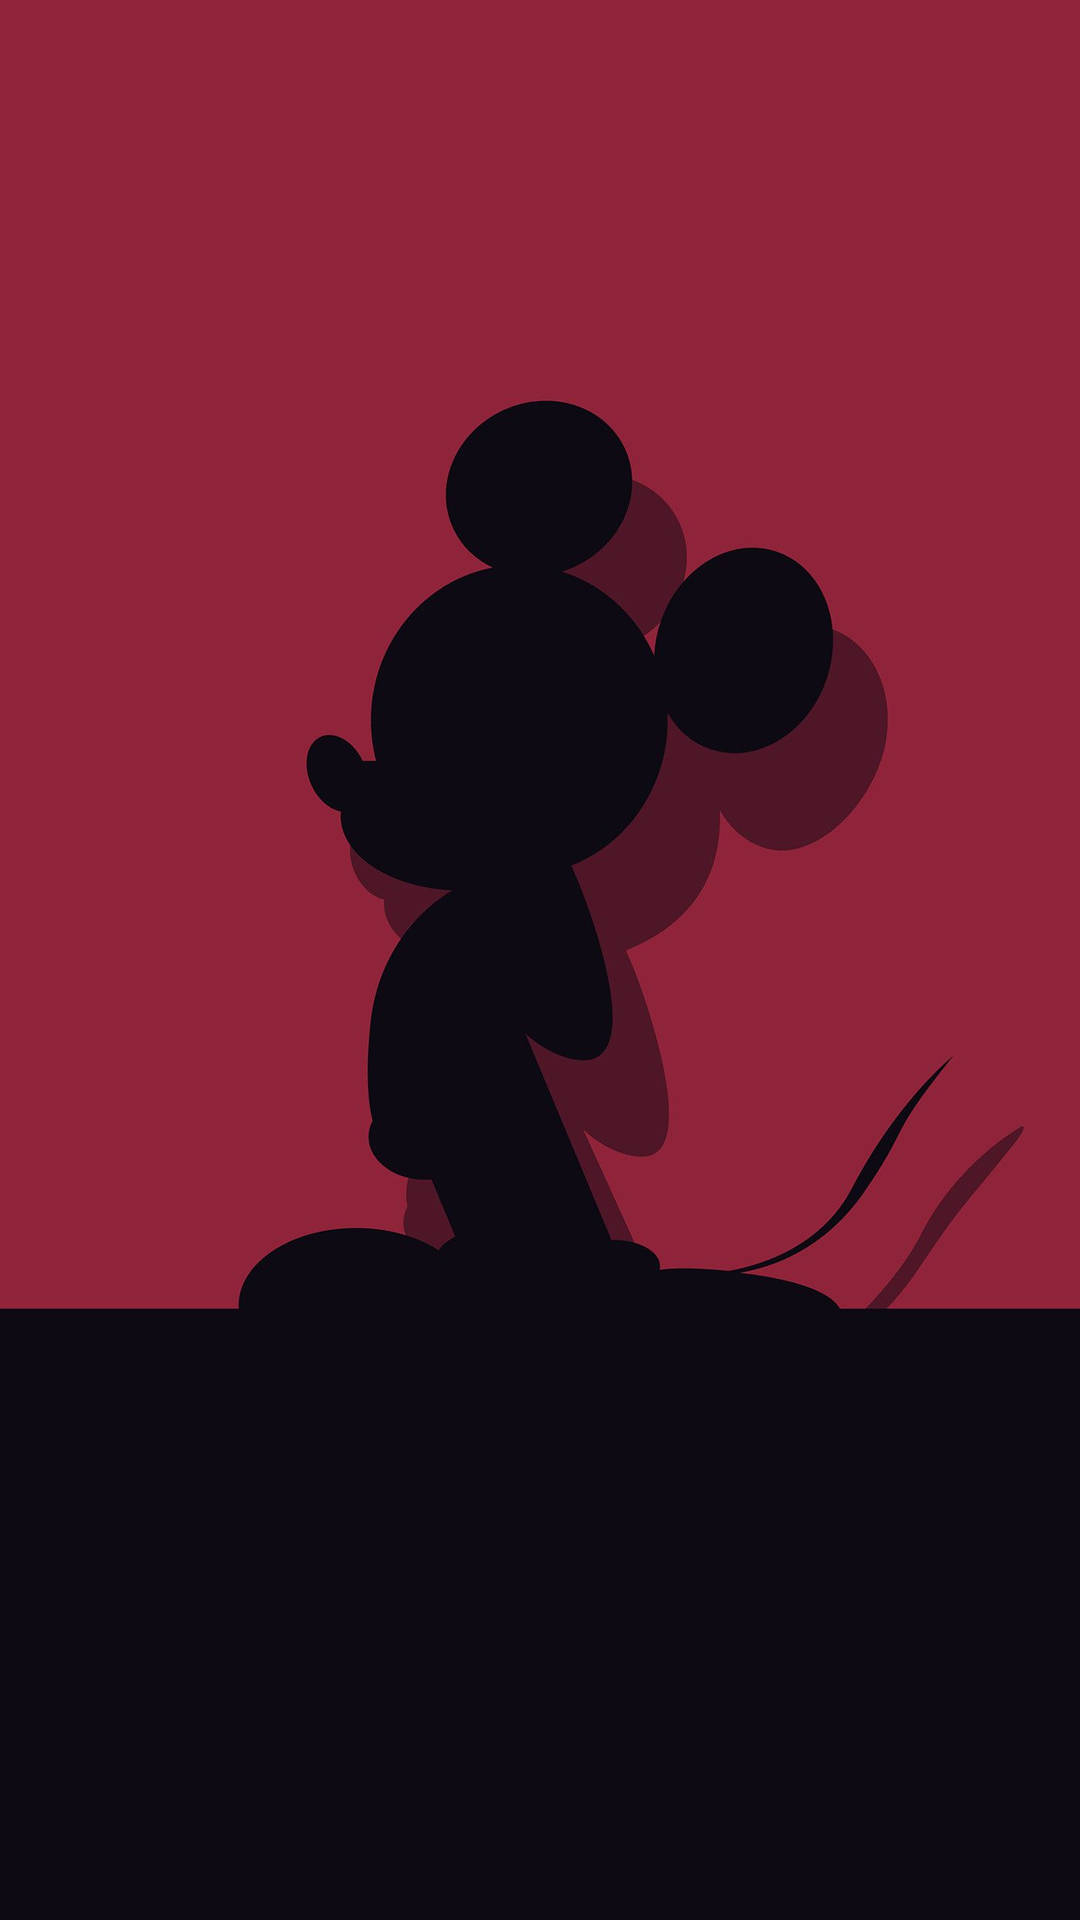 Cool Mickey MouseWallpapers